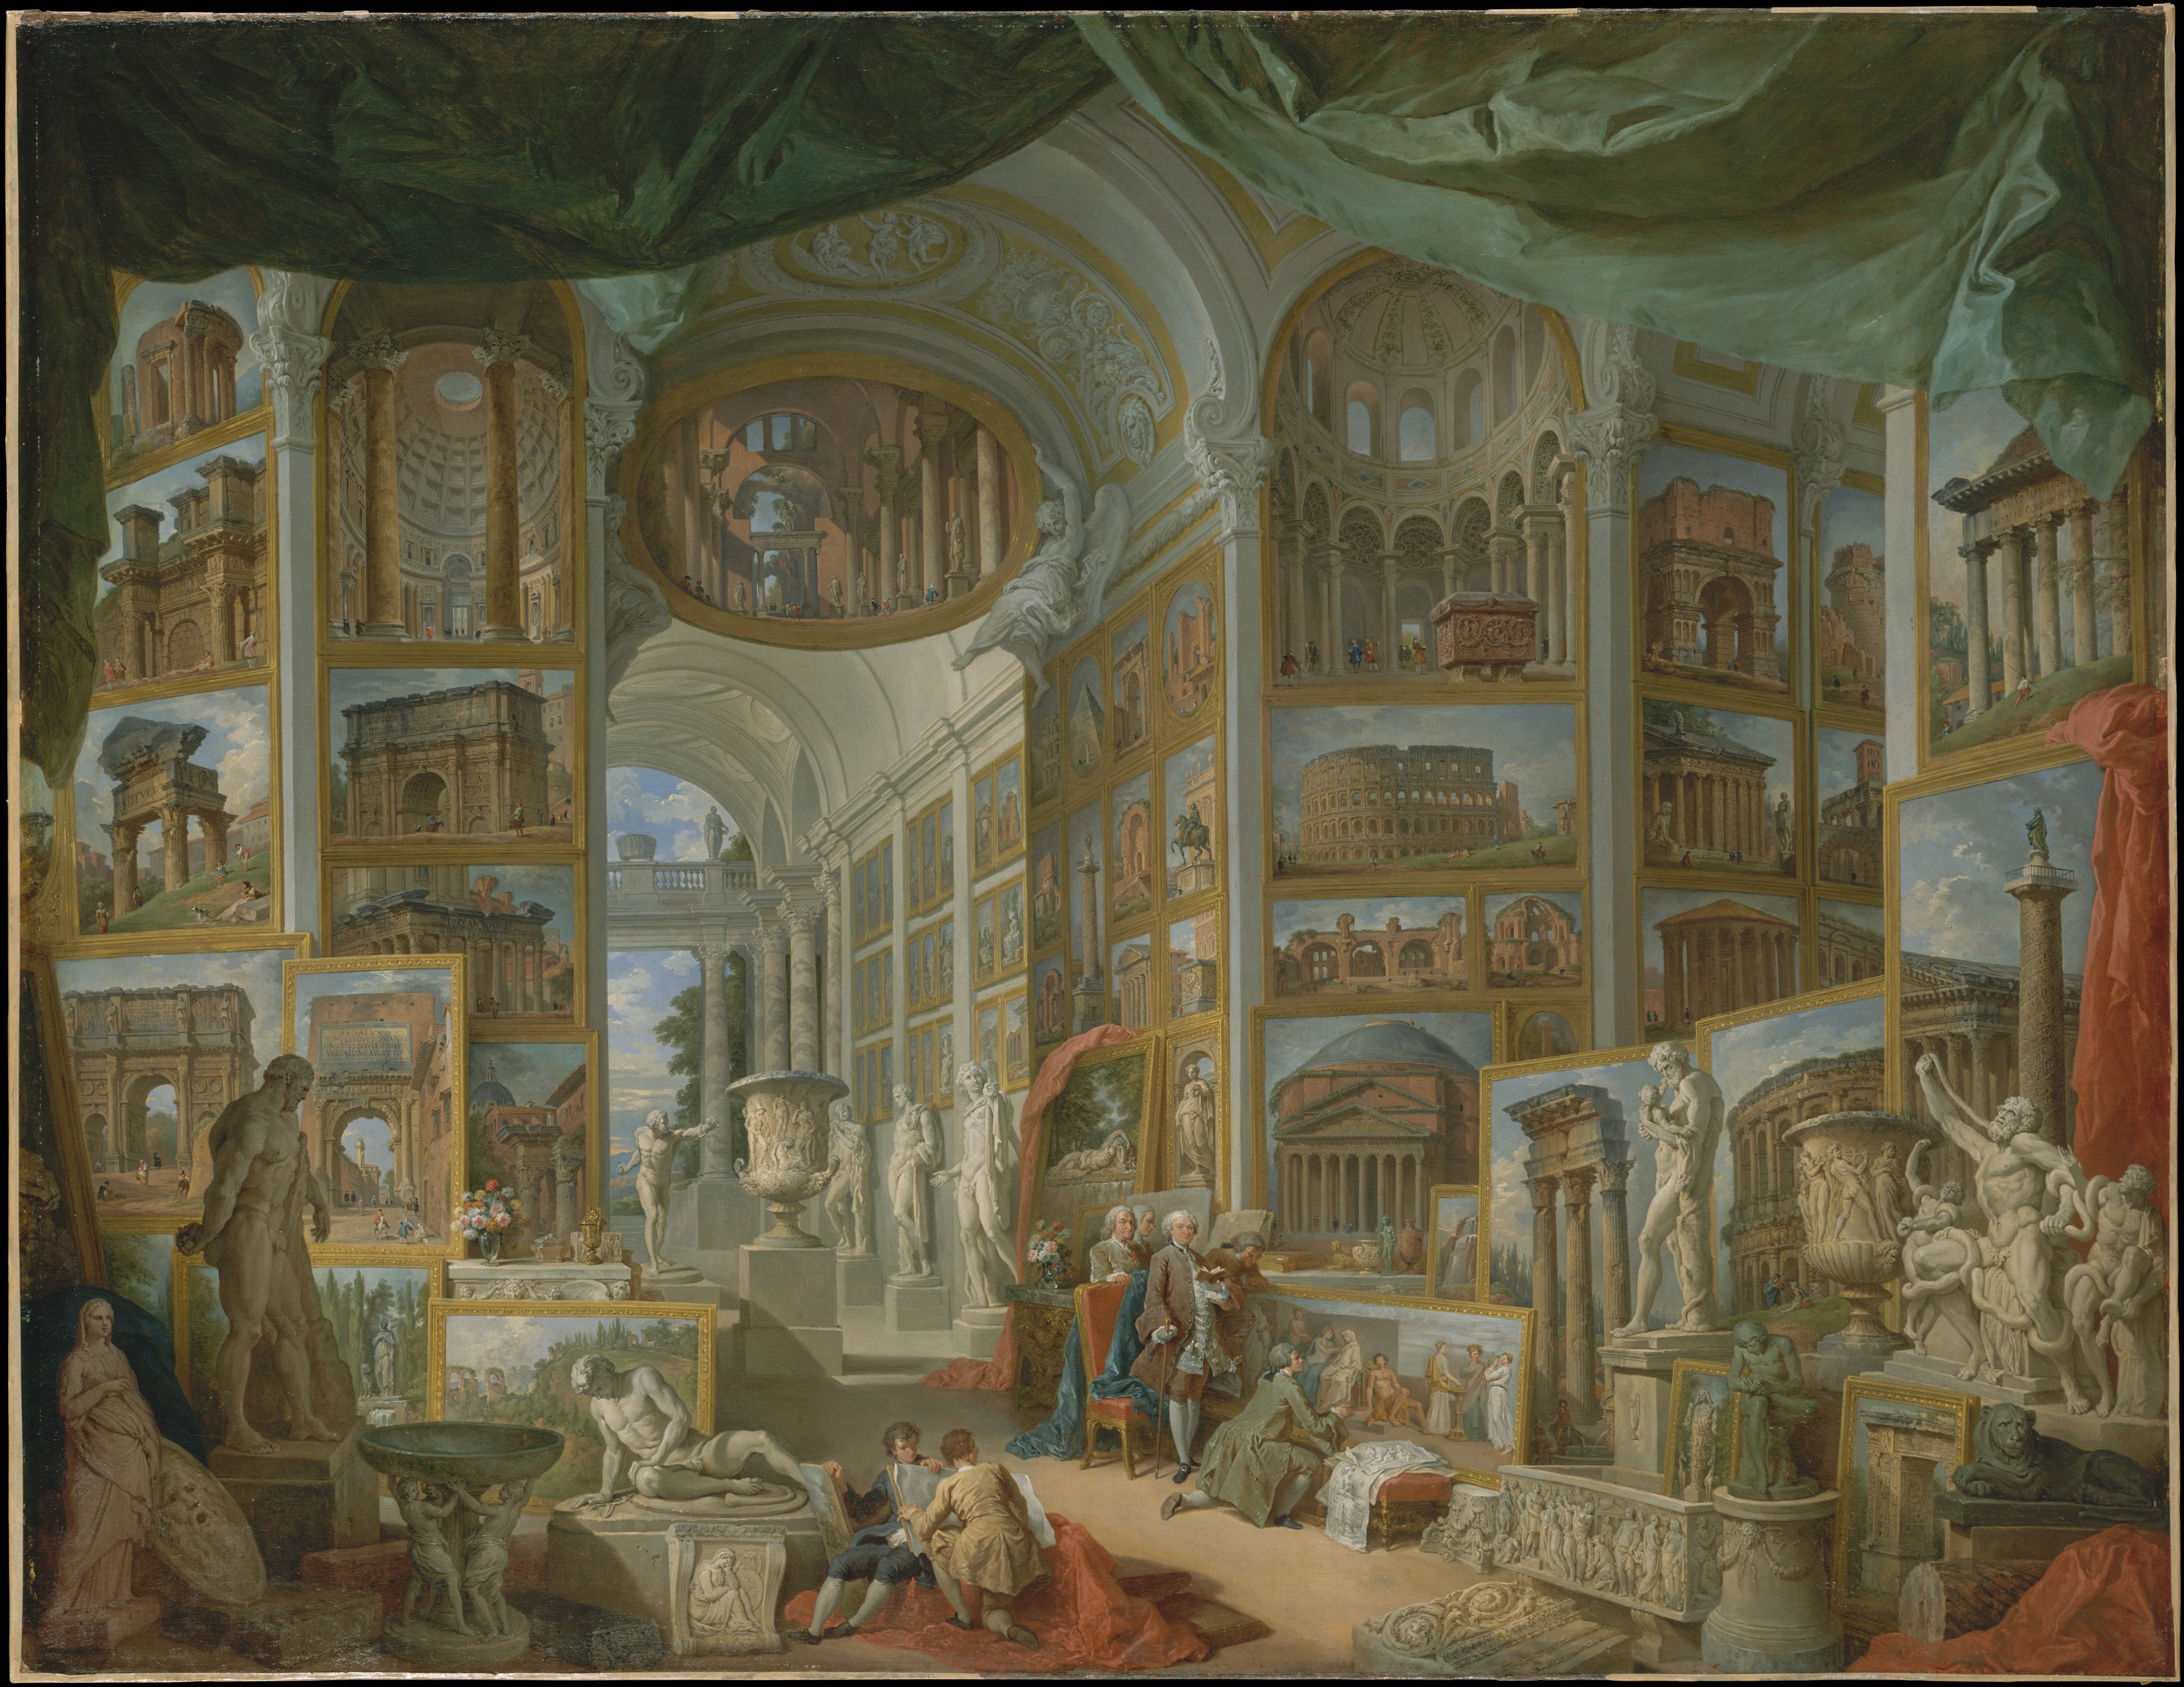 Rome antique by Giovanni Paolo Panini - Vers 1757 - 172.1 x 229.9 cm Metropolitan Museum of Art